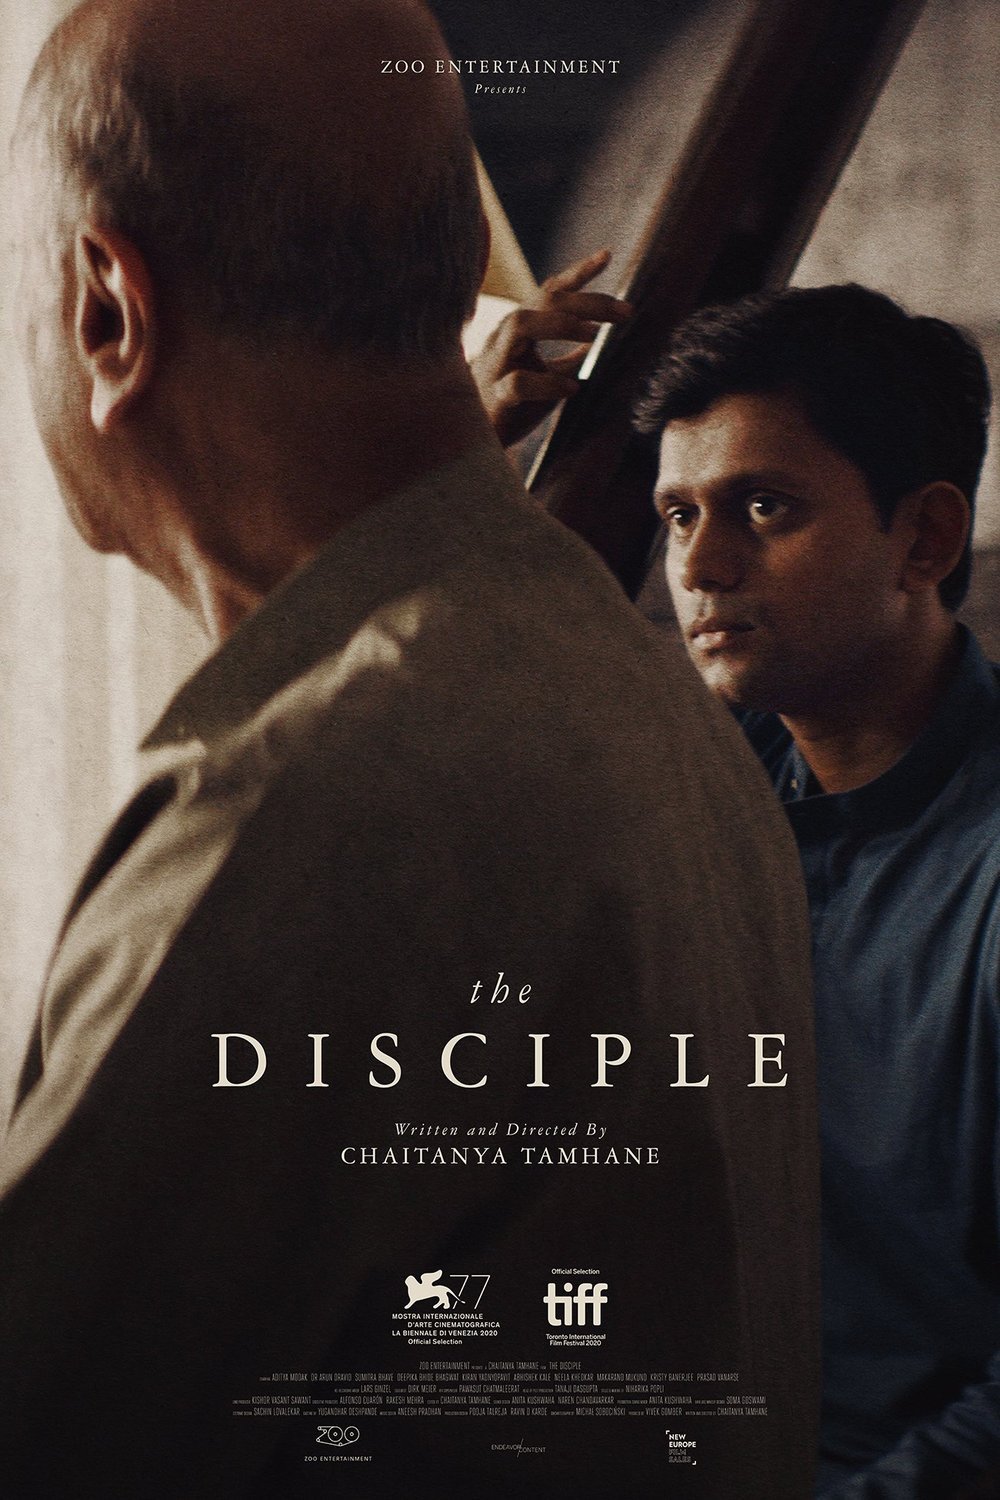 Marathi poster of the movie The Disciple